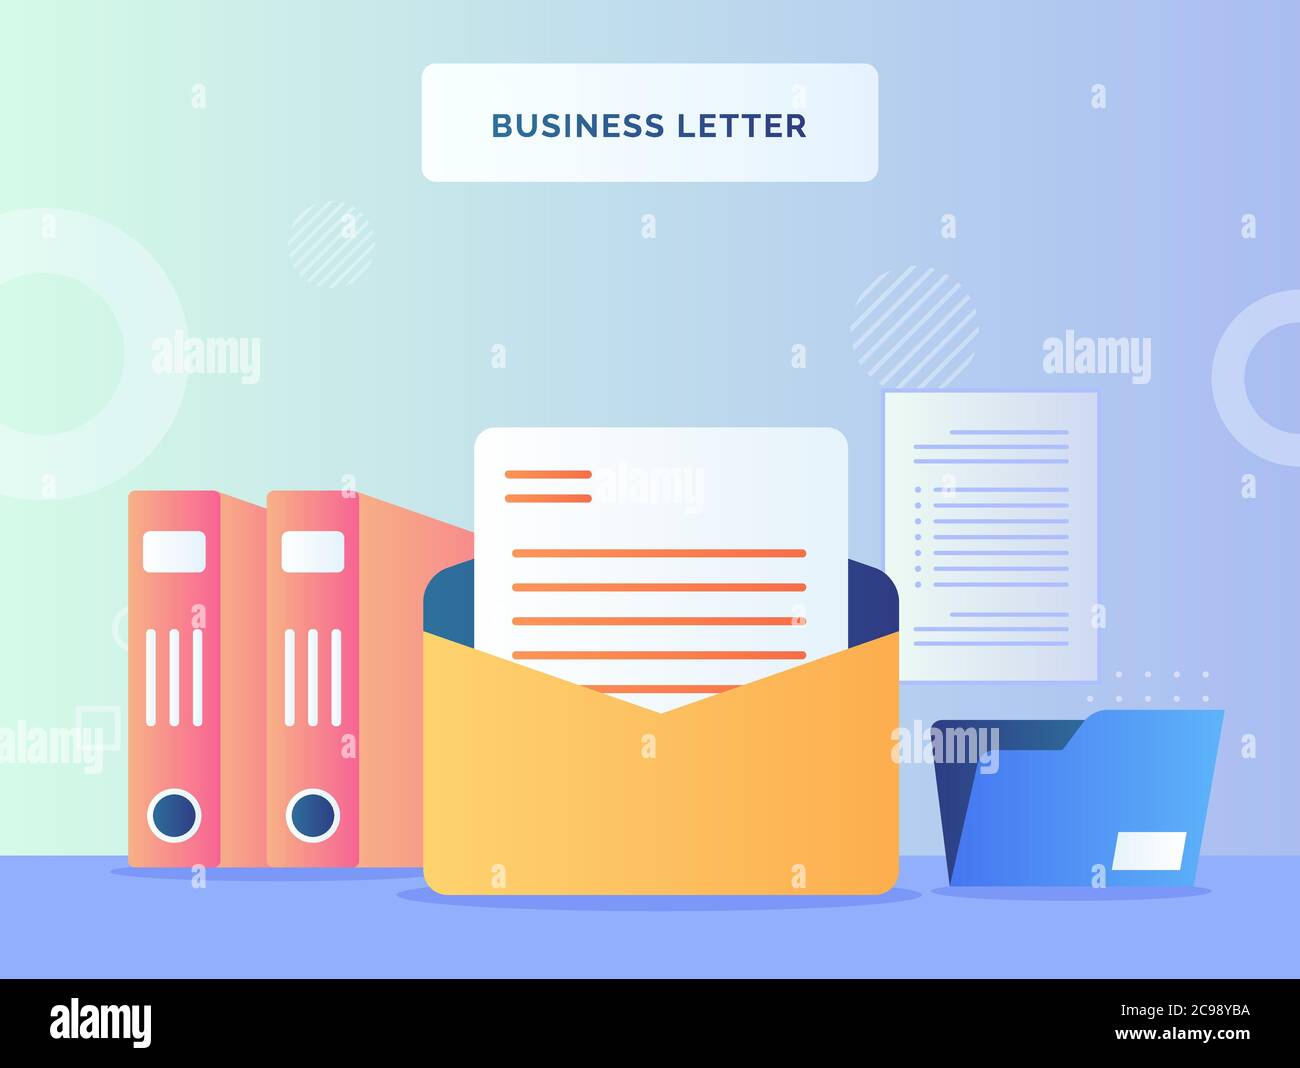 Business letter concept text paper in open envelope background of file folder file holder with flat style Stock Vector